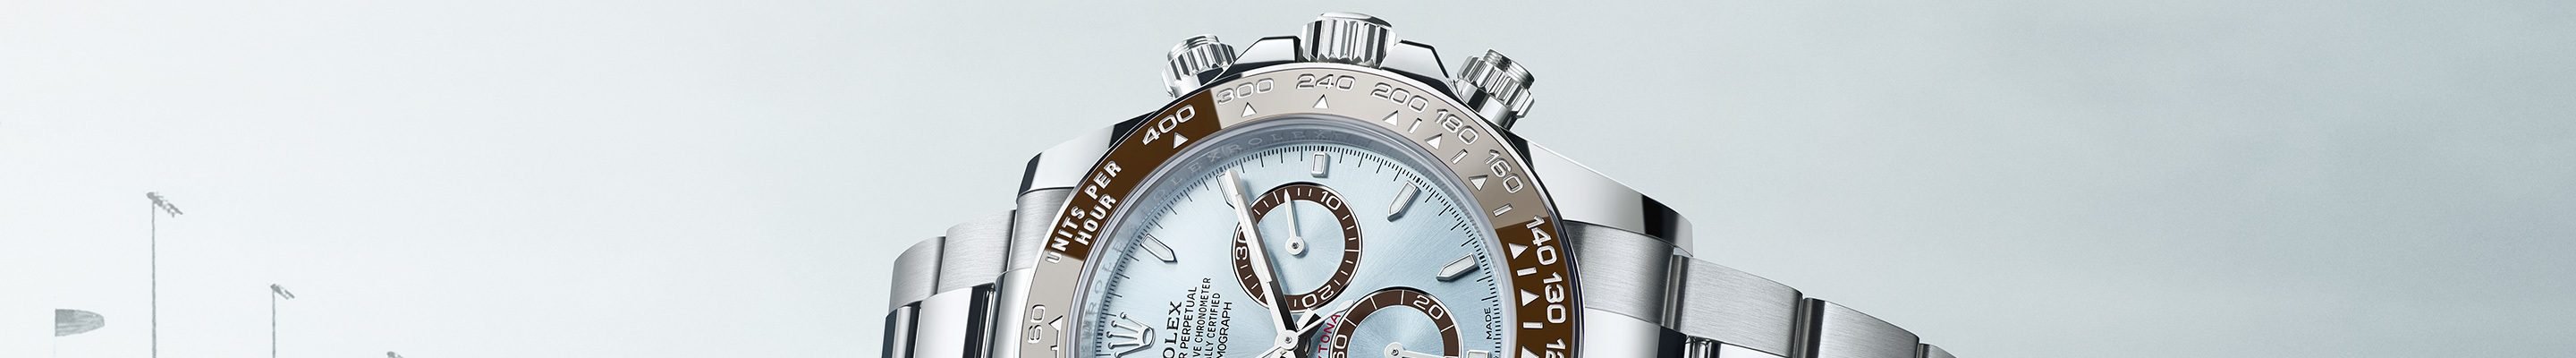 Cosmograph Daytona Oyster, 40 mm, platinum - M126506-0001 at Boutellier Montres